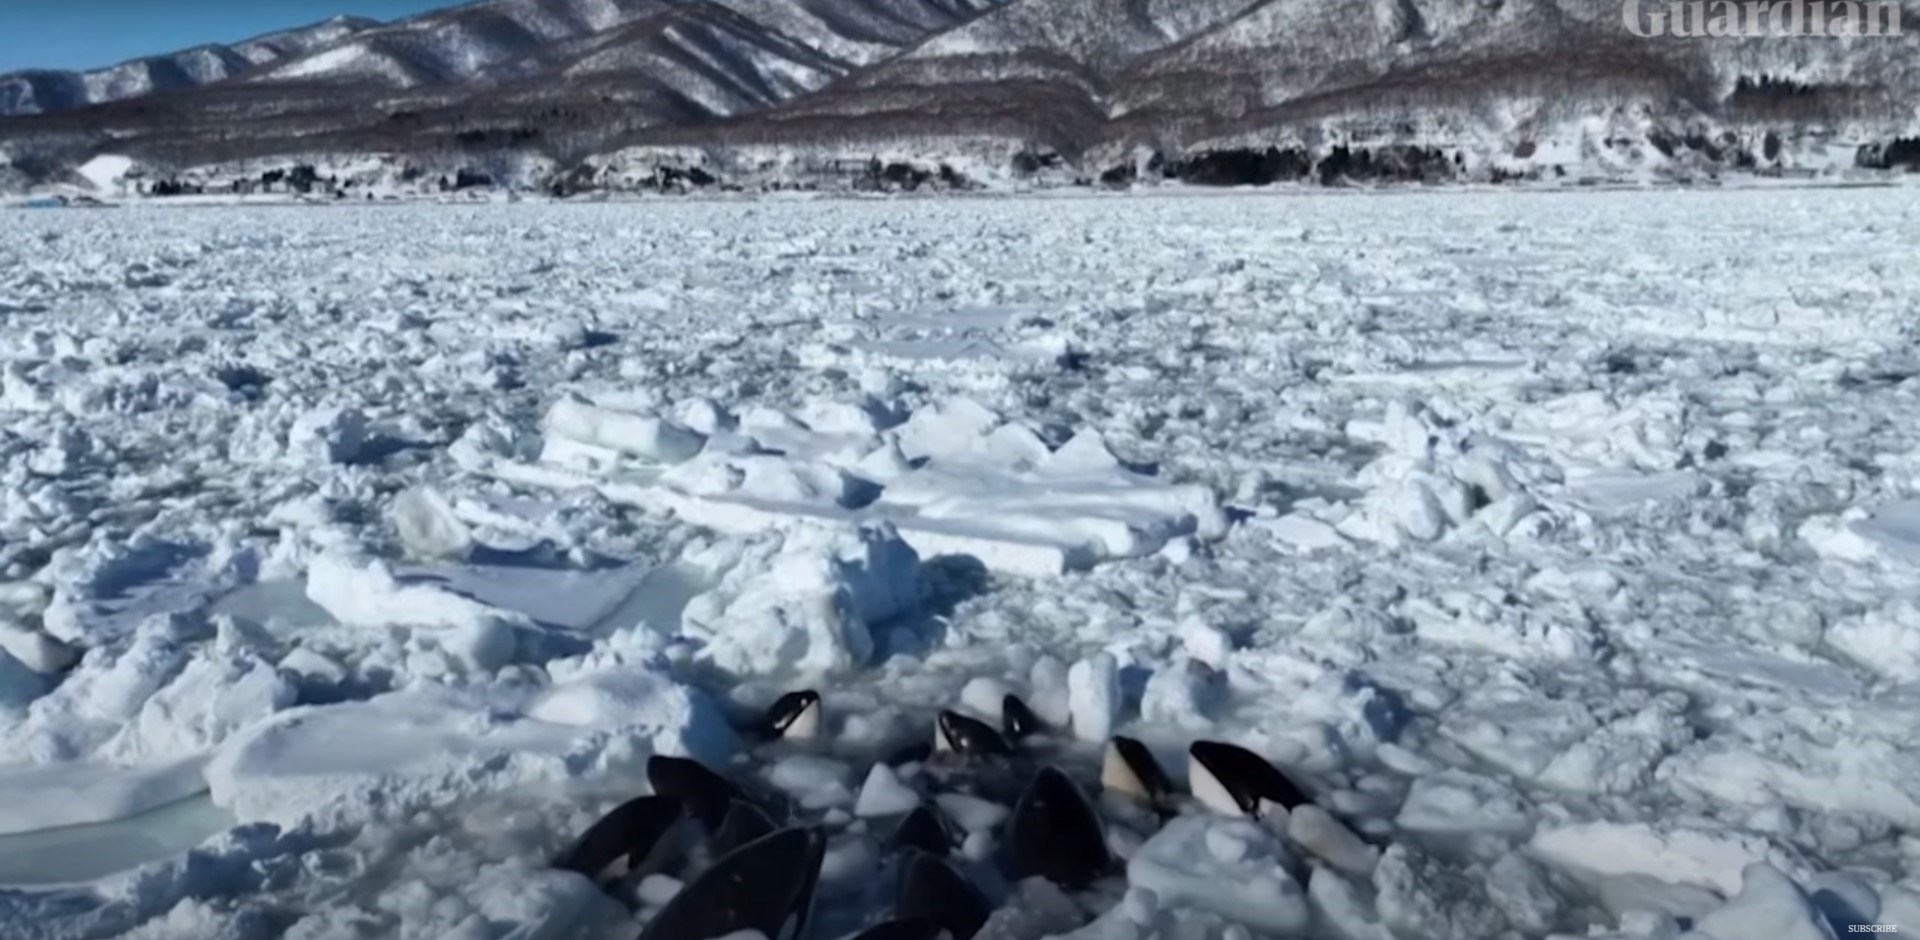 Life + Style: A group of killer whales trapped between ice sheets off the coast of Japan – video